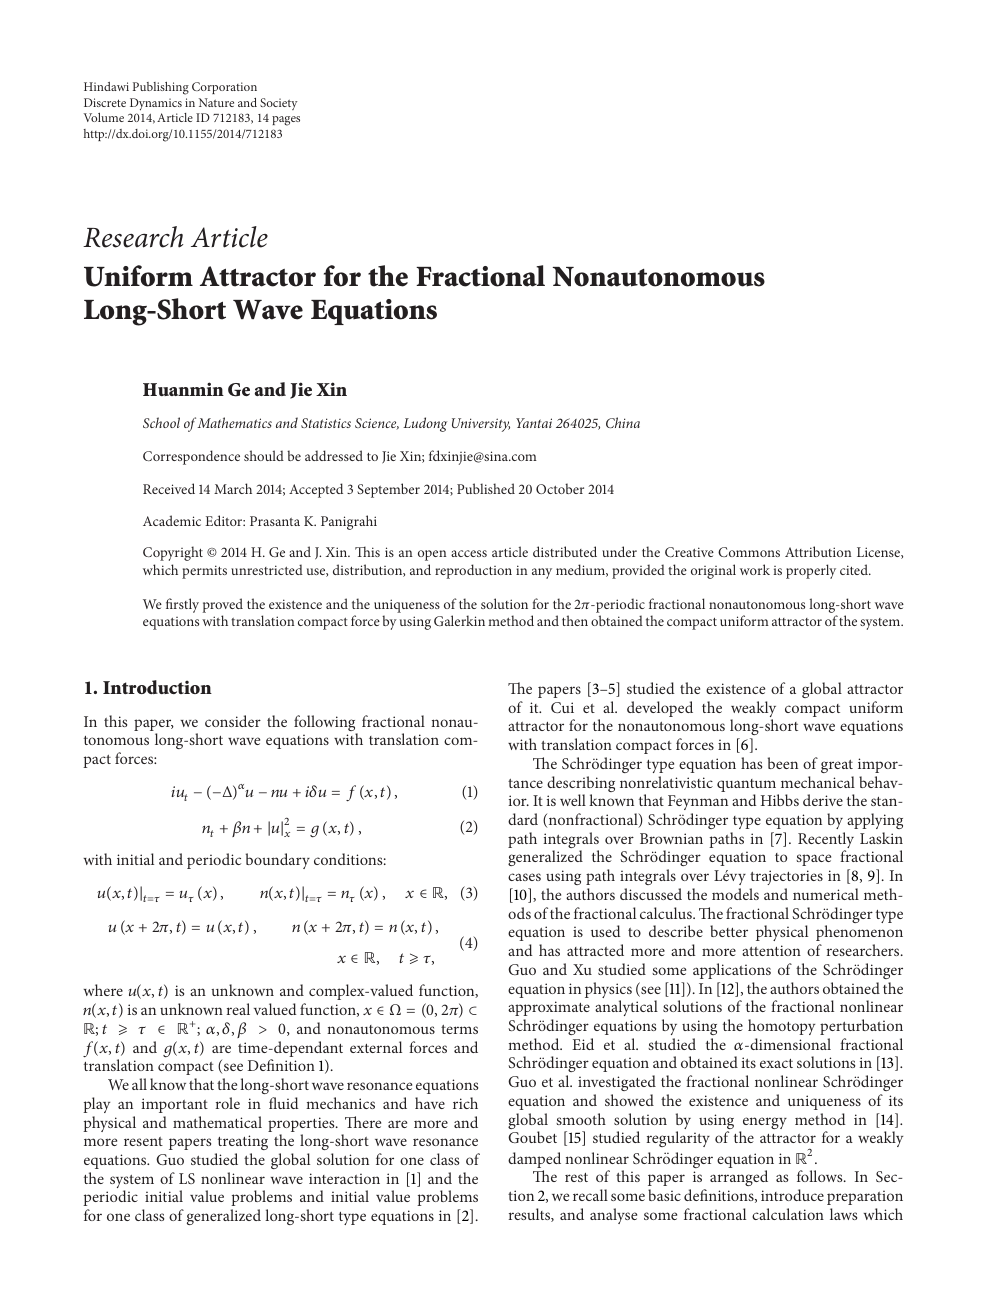 Uniform Attractor For The Fractional Nonautonomous Long Short Wave Equations Topic Of Research Paper In Mathematics Download Scholarly Article Pdf And Read For Free On Cyberleninka Open Science Hub